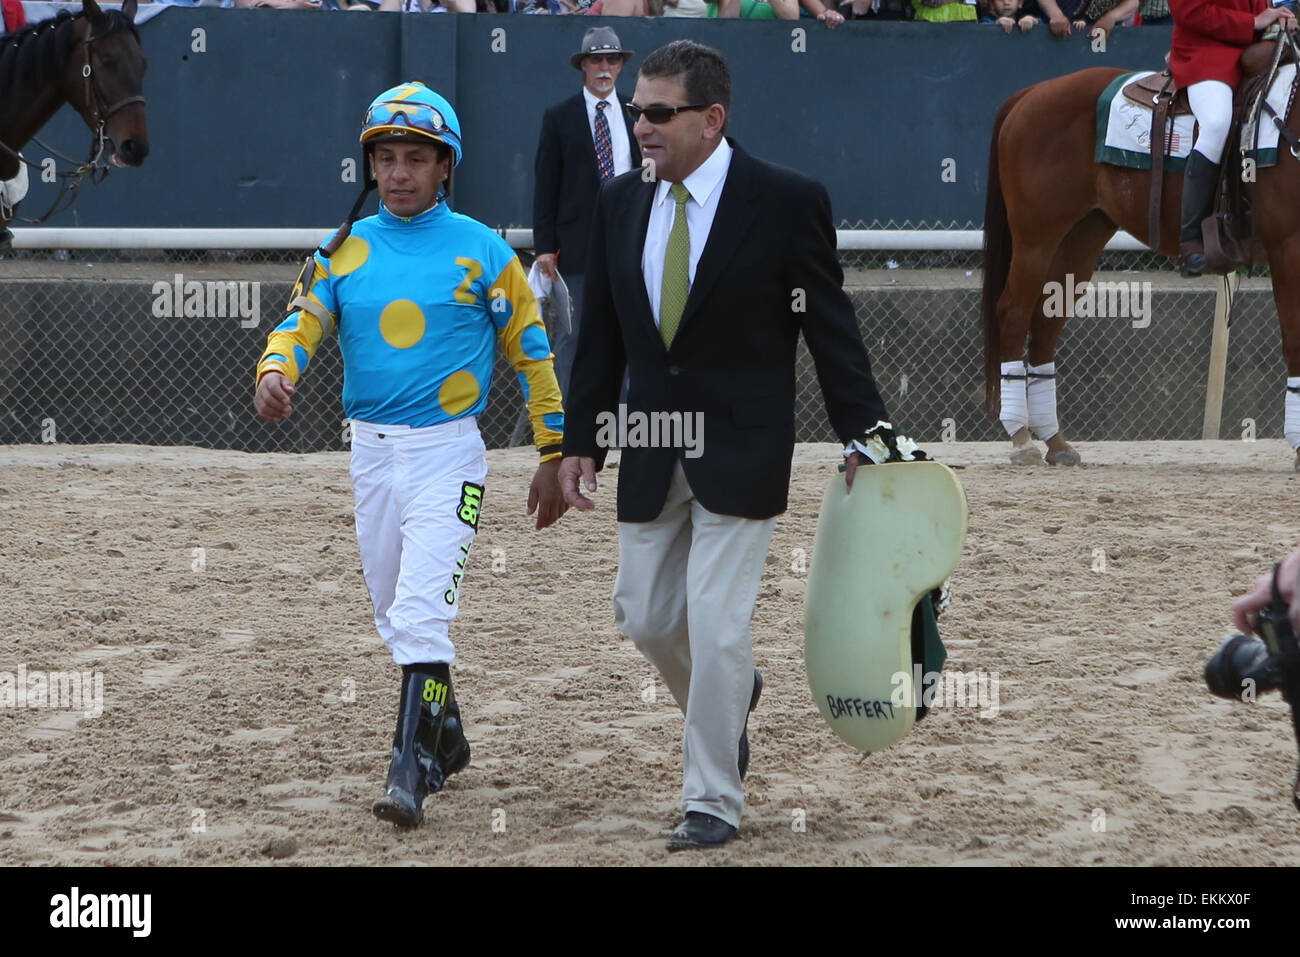 Hot Springs, Arkansas, USA. 11th Apr, 2015. Co-trainer Jimmy Barnes and jockey Victor Espinoza after the Arkansas Derby at Oaklawn Park in Hot Springs, AR. Justin Manning/ESW/CSM/Alamy Live News Stock Photo